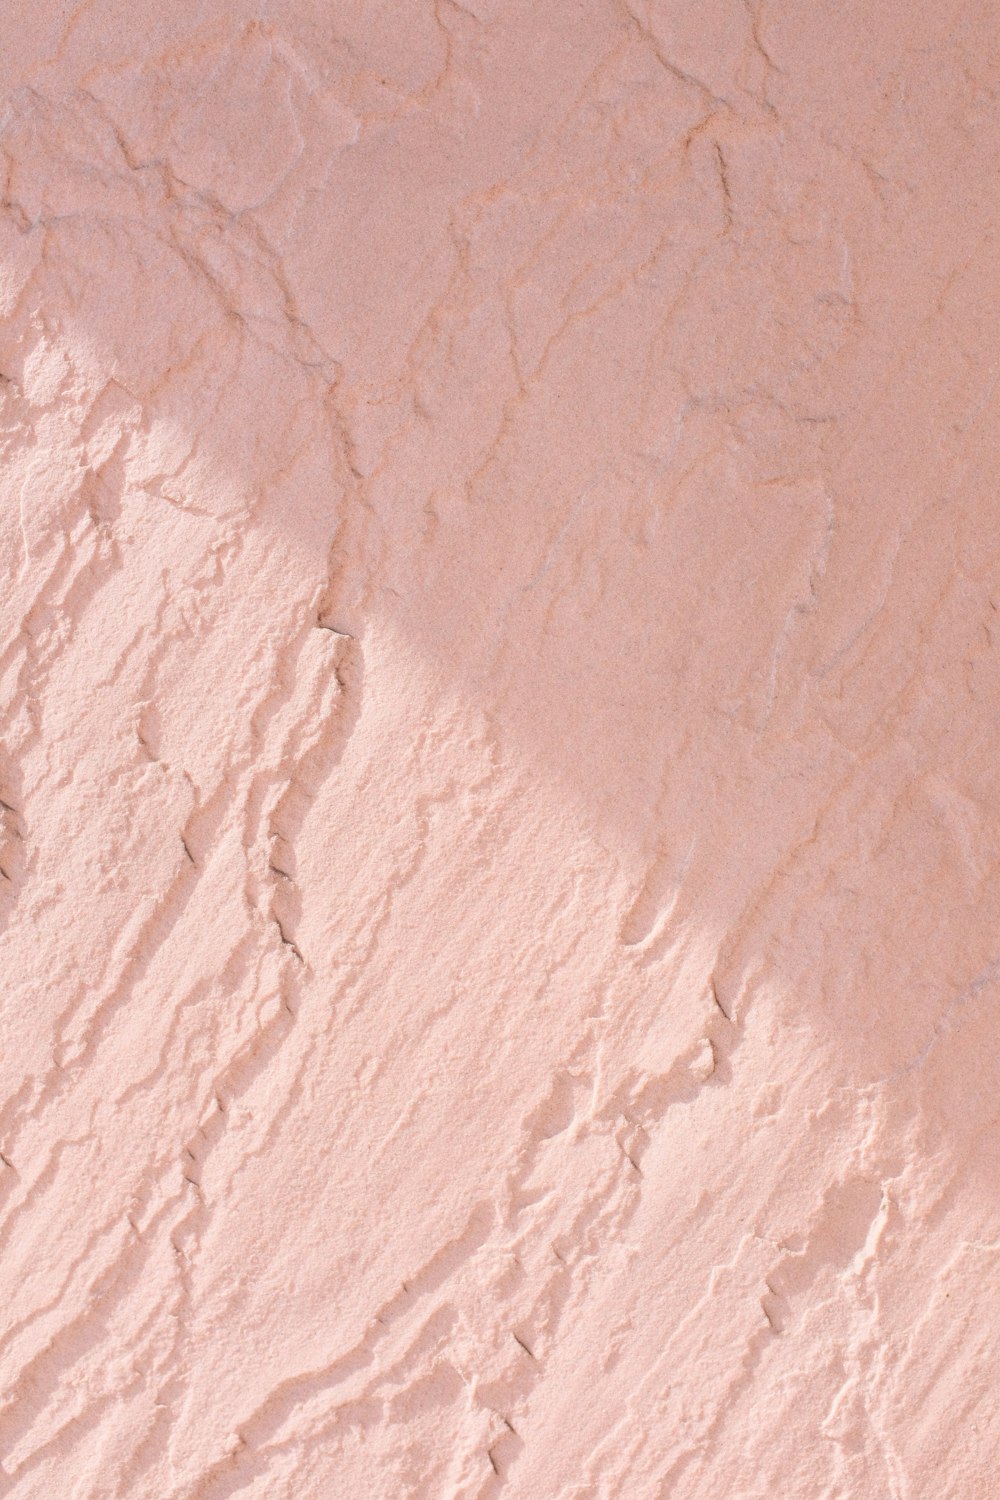 Texture Cream Pictures | Download Free Images on Unsplash